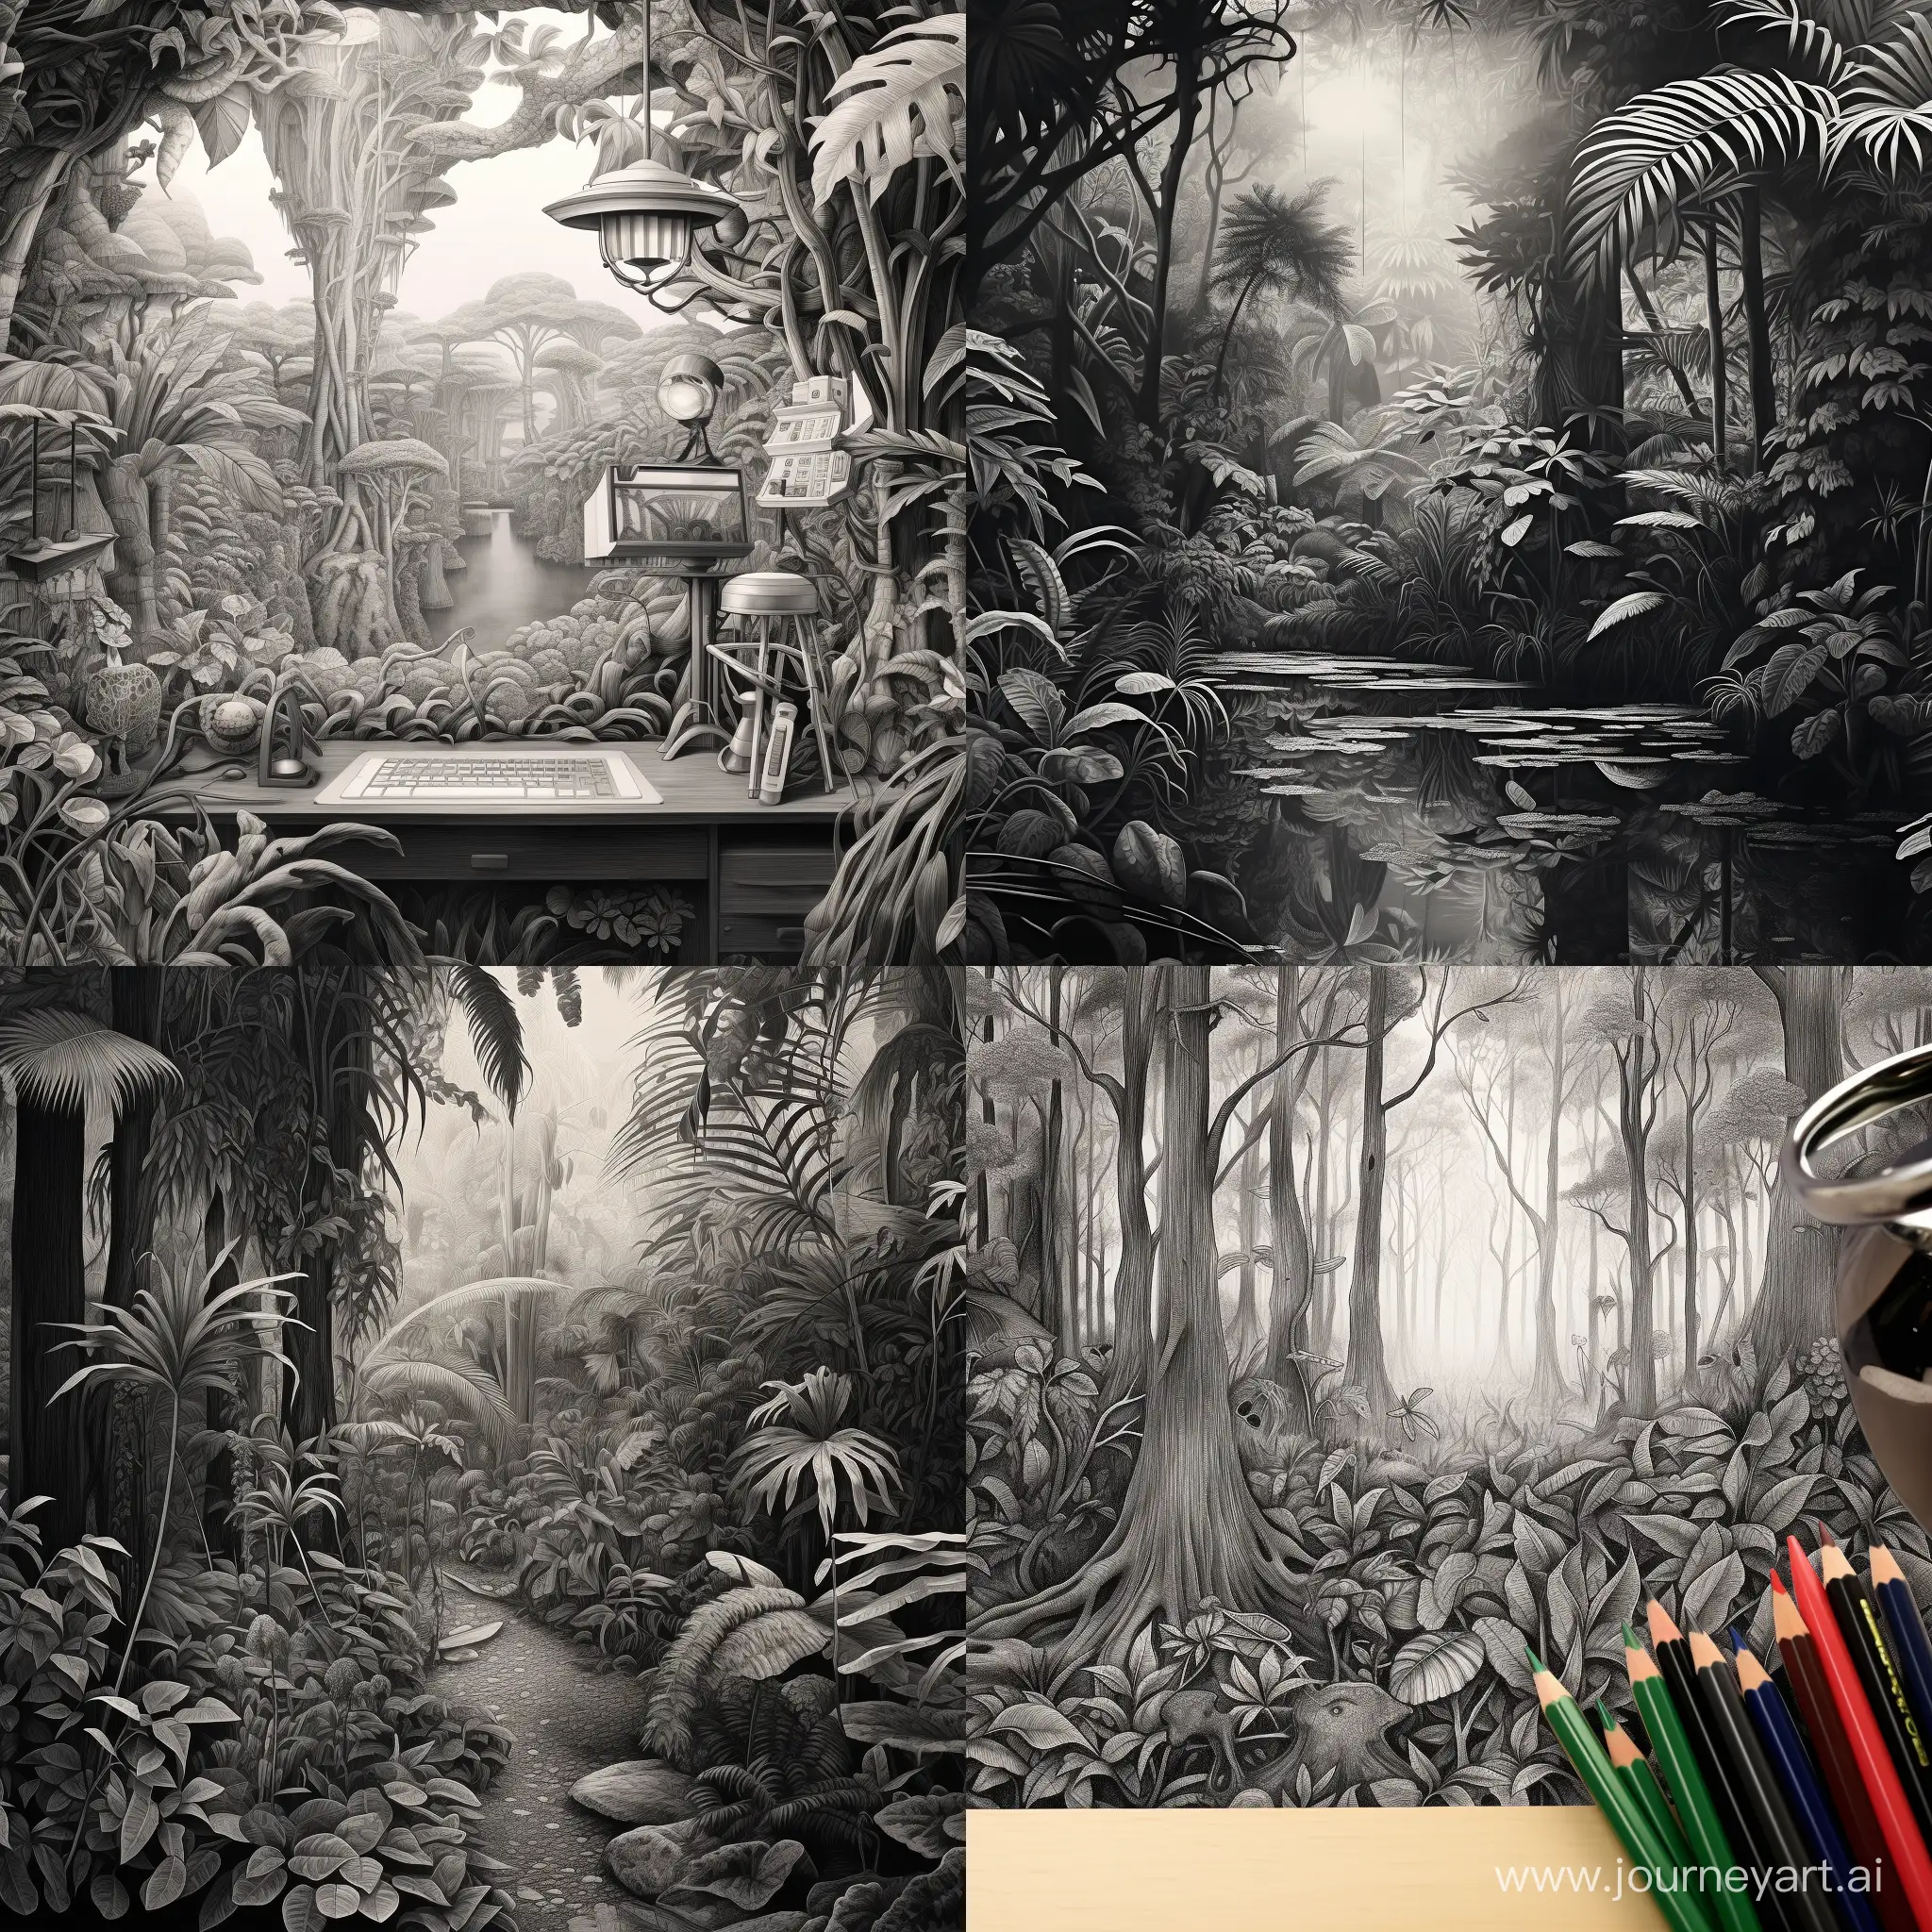 Give a photograph an artistic touch by transforming it into a detailed pencil drawing with a touch of surrealism. The photograph features a lush forest with towering trees, sunlight filtering through the leaves, and a mystical atmosphere. The art style should be inspired by the works of artist Salvador Dali and the intricate details of Albrecht Durer's drawings. The camera shot is a close-up shot, captured with a macro lens, highlighting the intricate details of the leaves and textures of the forest. The pencil drawing should have cross-hatching techniques, subtle surreal elements, and a sense of depth and realism.